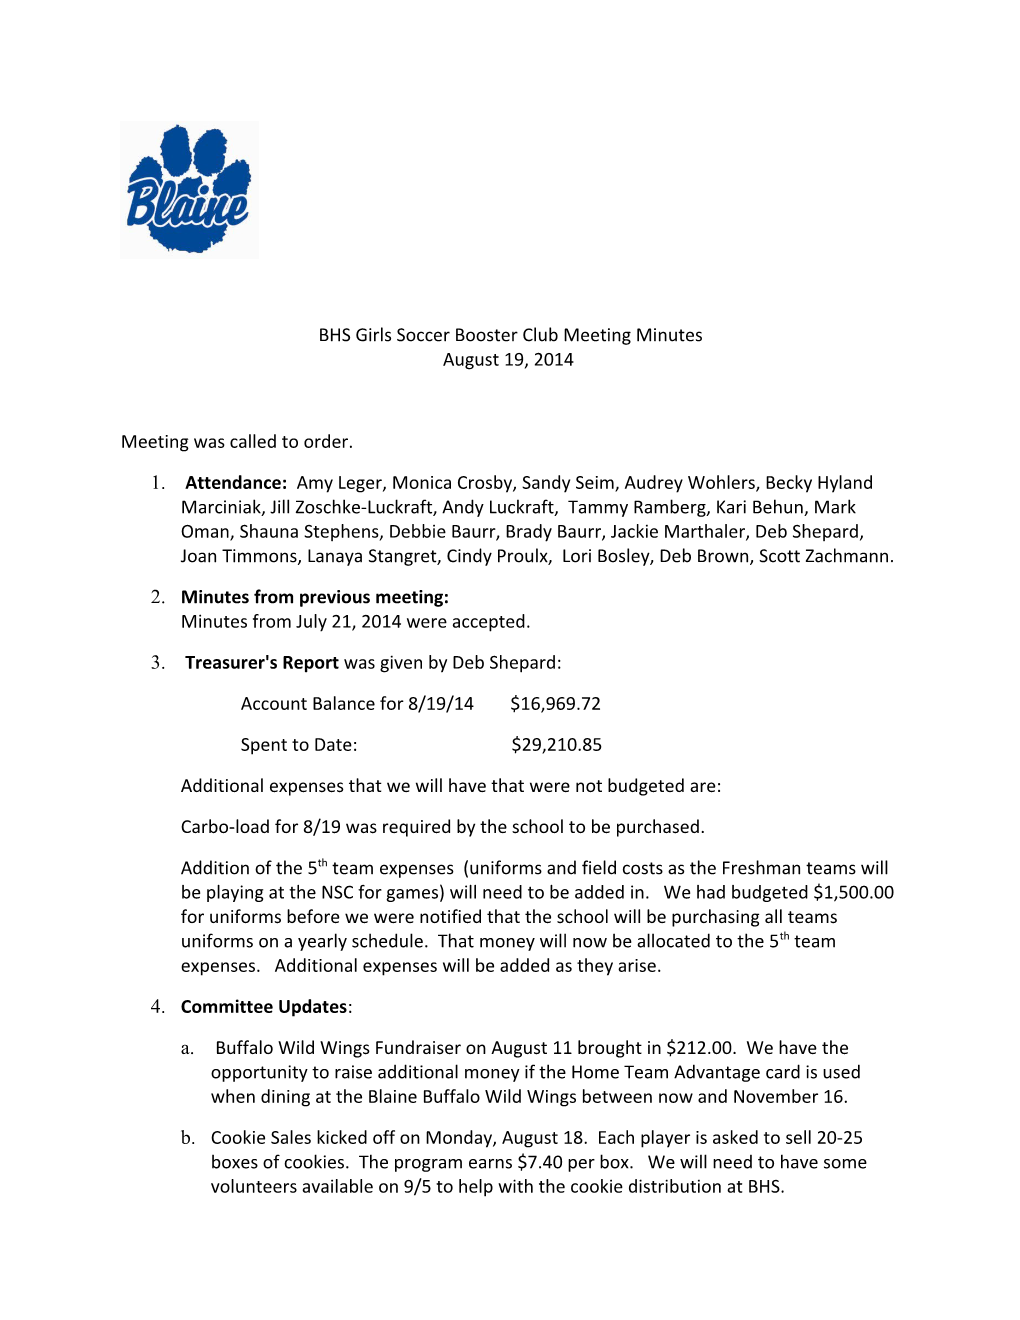 BHS Girls Soccer Booster Club Meeting Minutes August 19, 2014